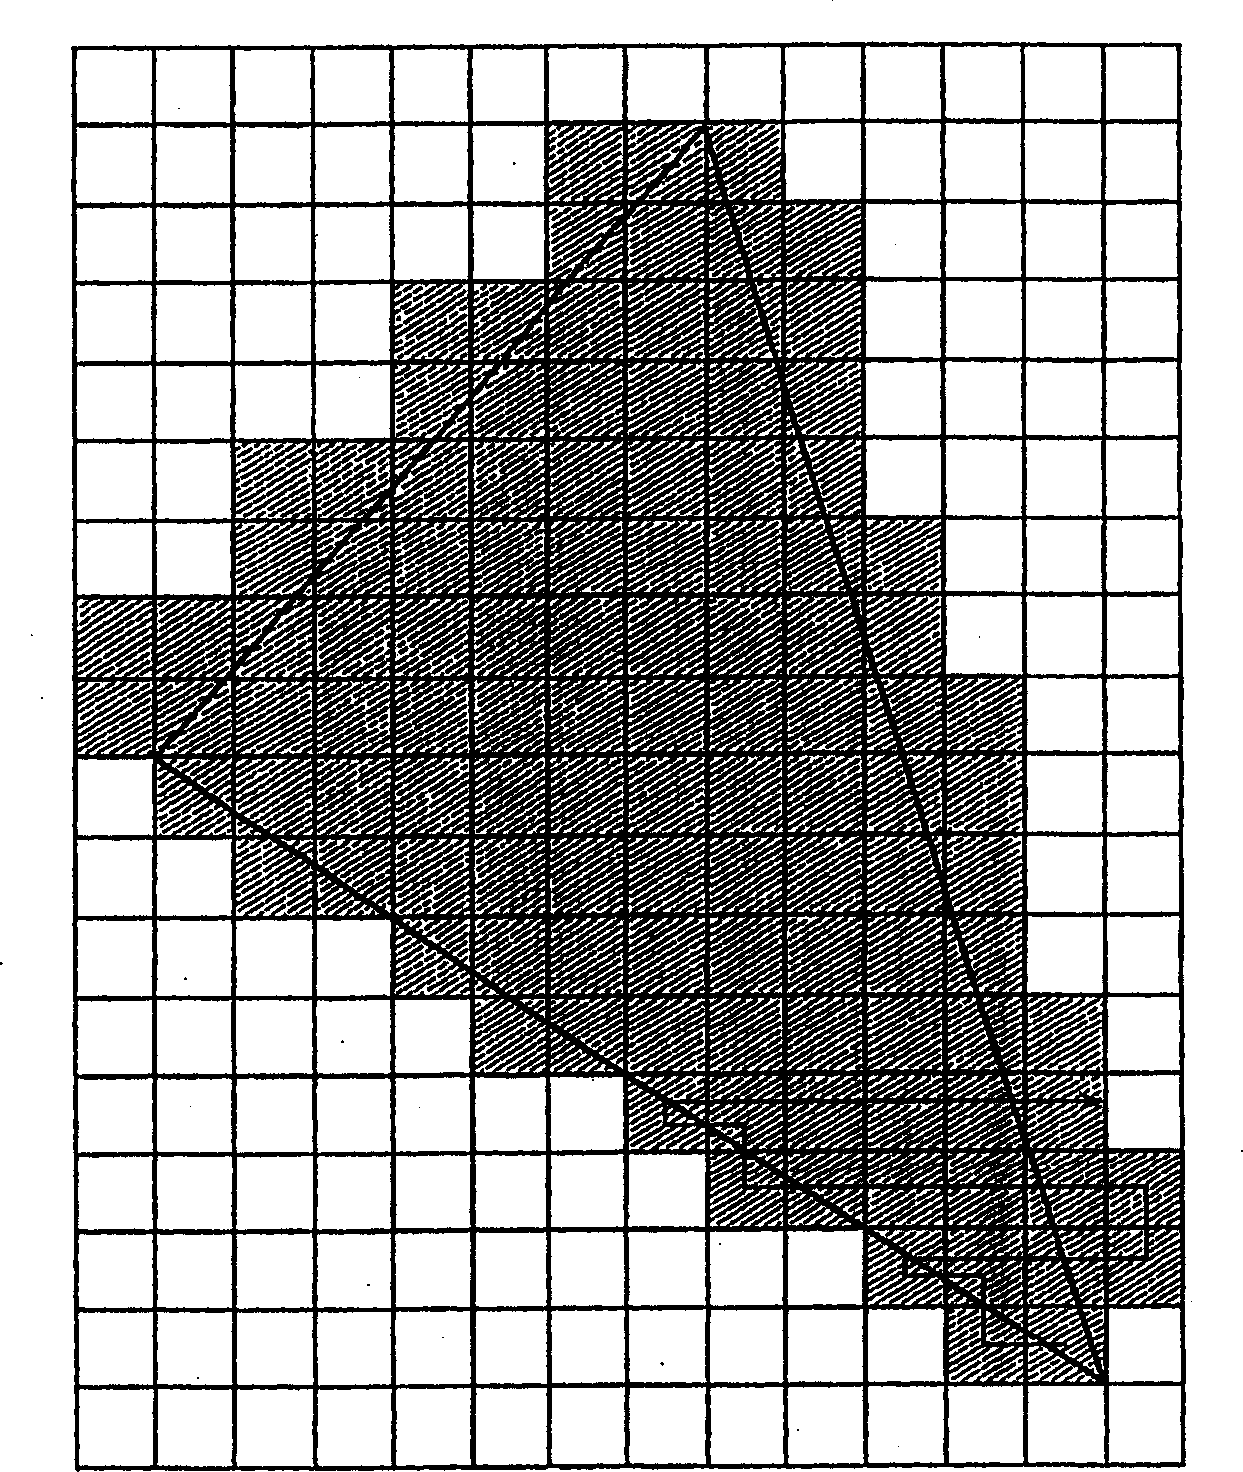 Graphics processing apparatus, methods and computer program products using minimum-depth occlusion culling and zig-zag traversal